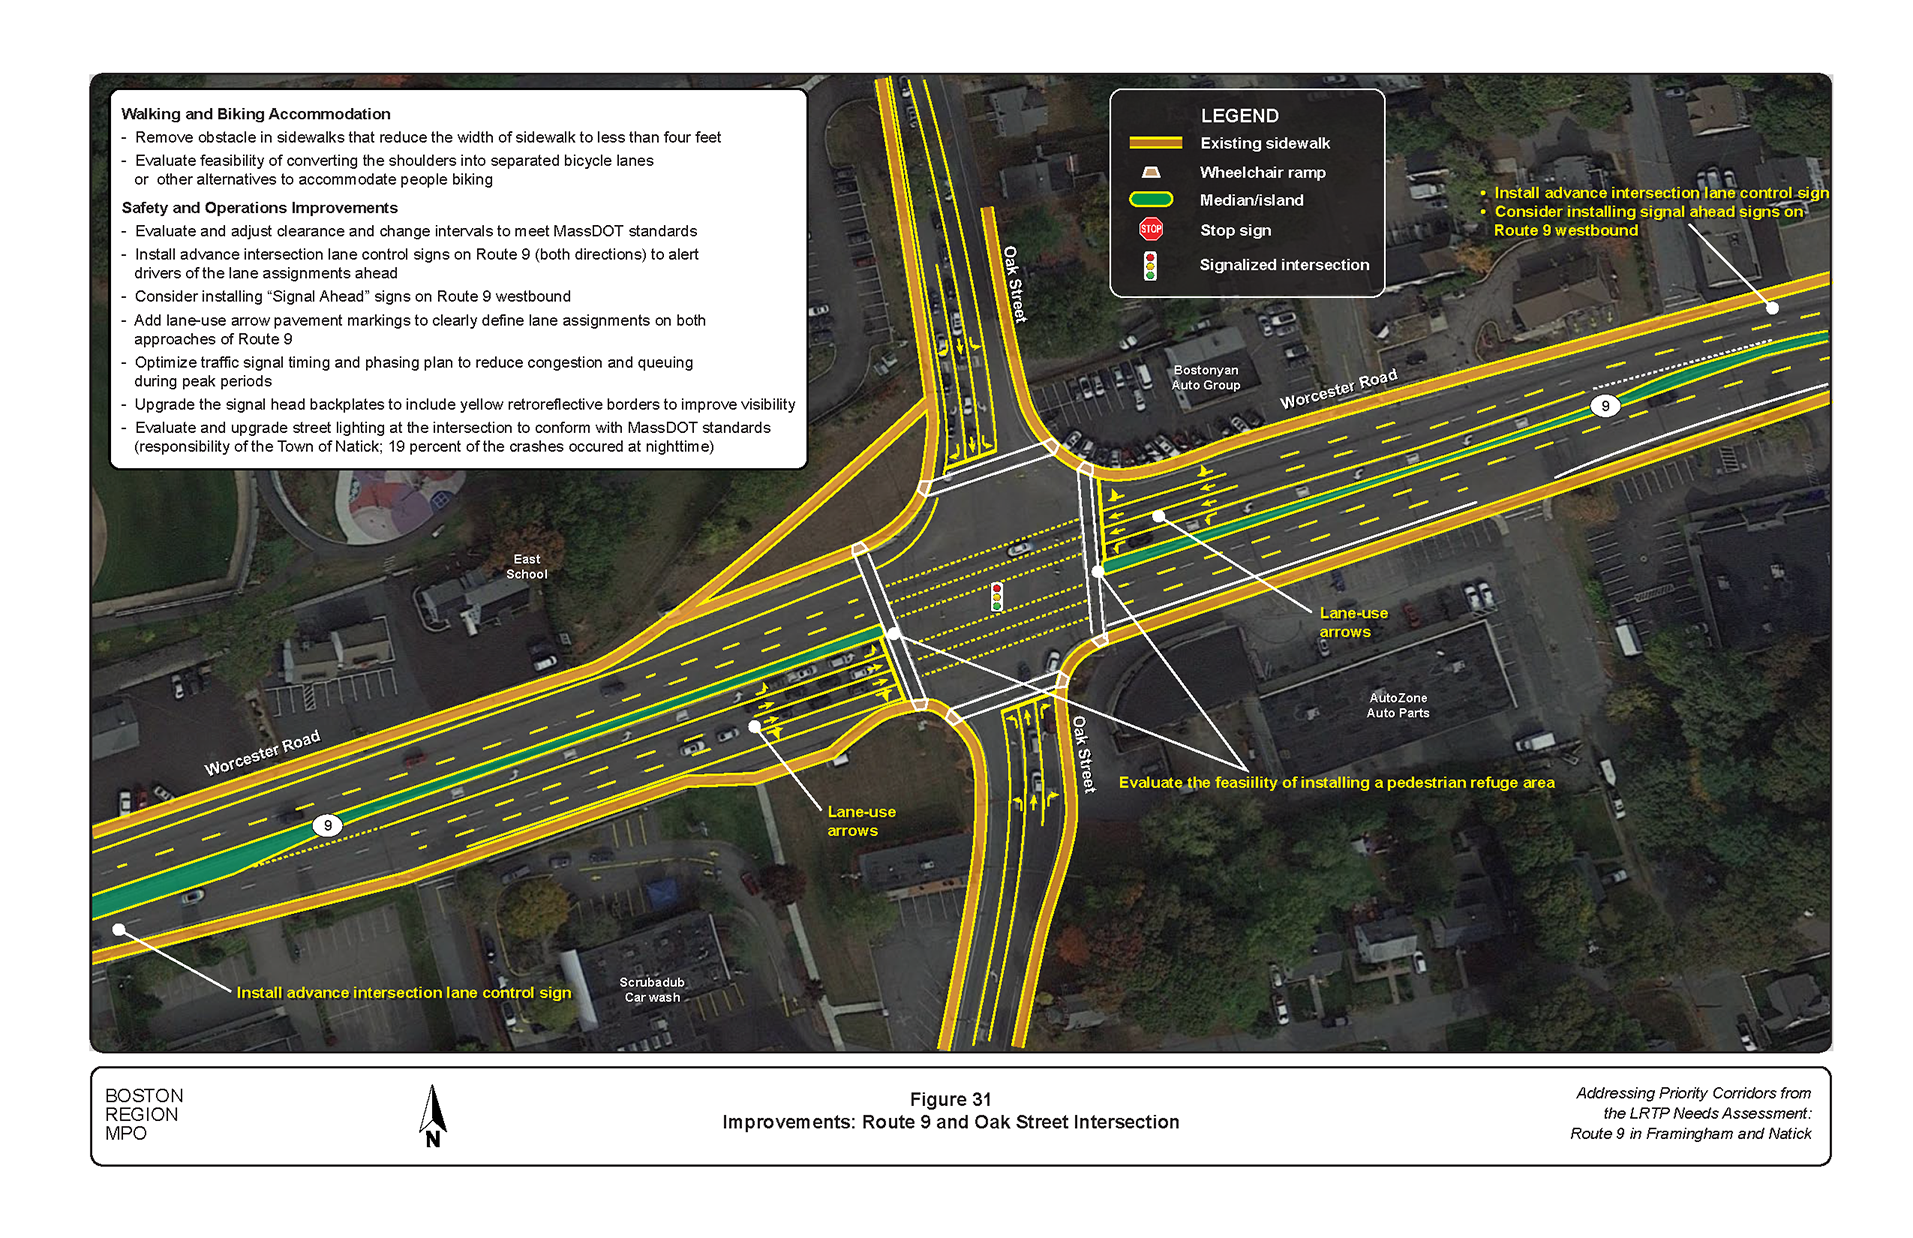 Figure 31 is an aerial photo showing the intersection of Route 9 and Oak Street and the improvements